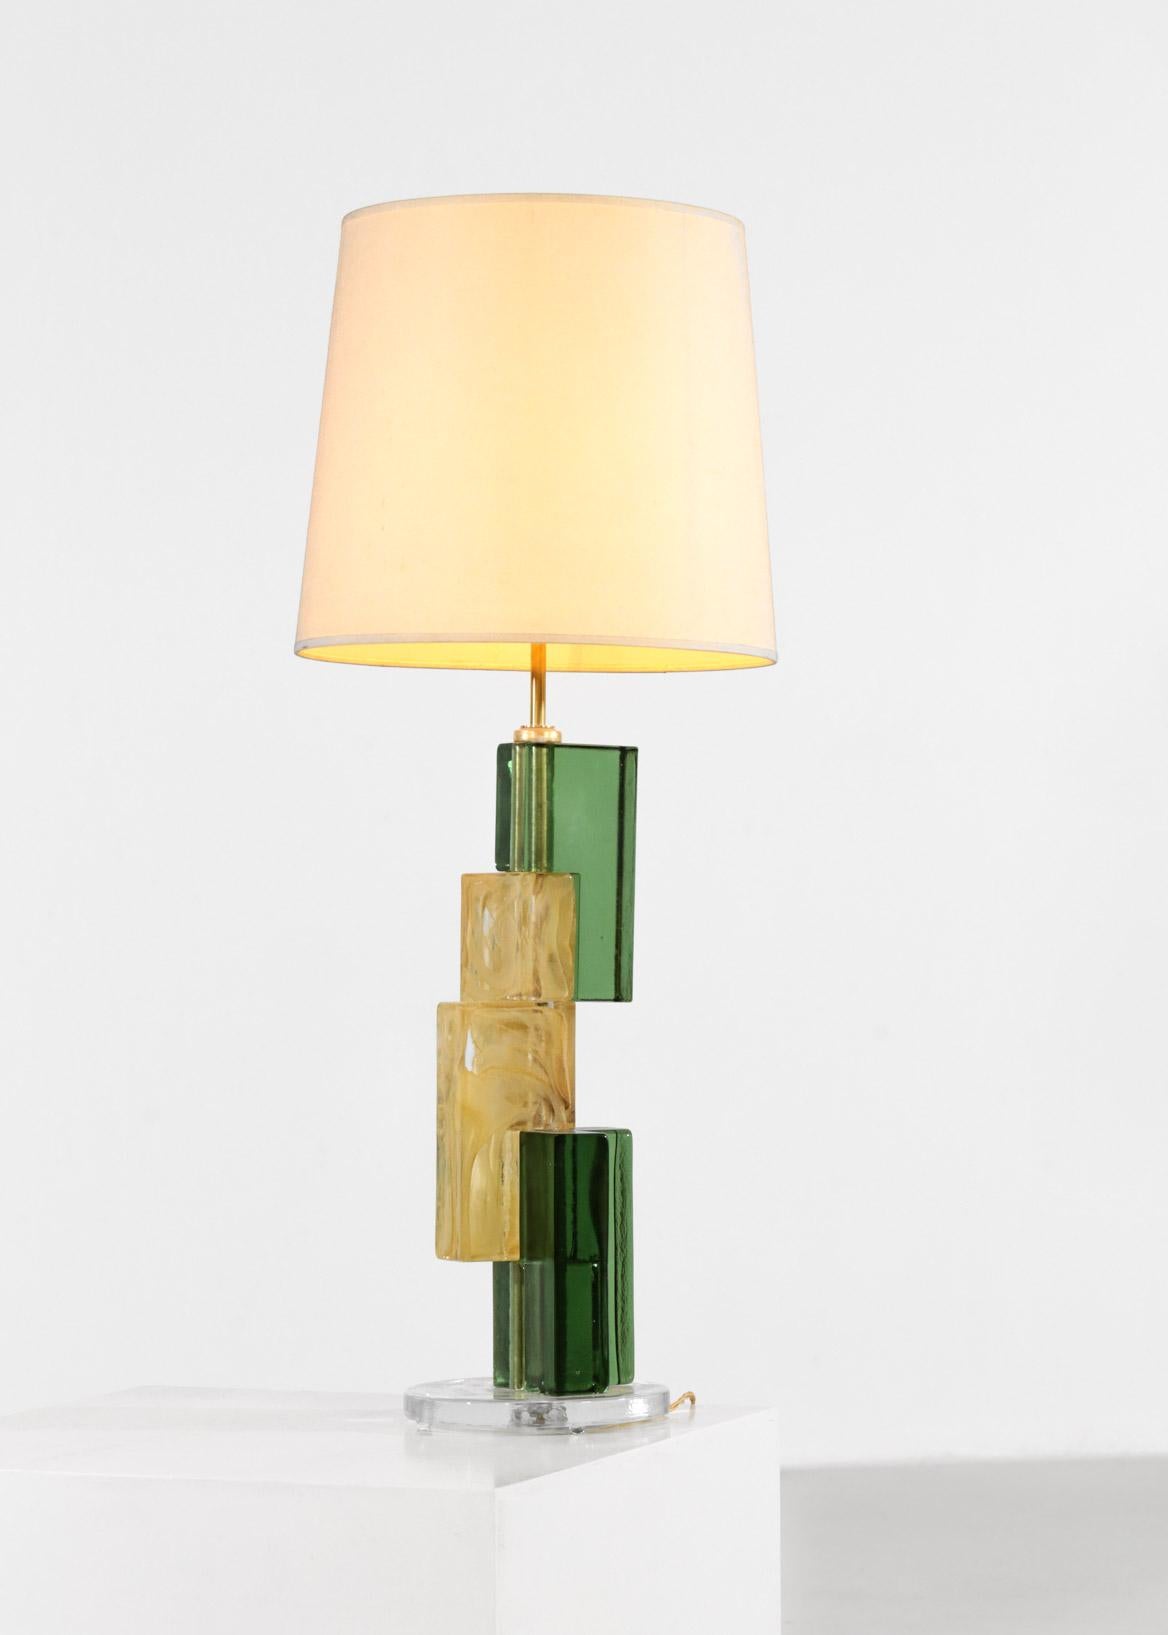 Contemporary Large Modern Table Lamp Murano